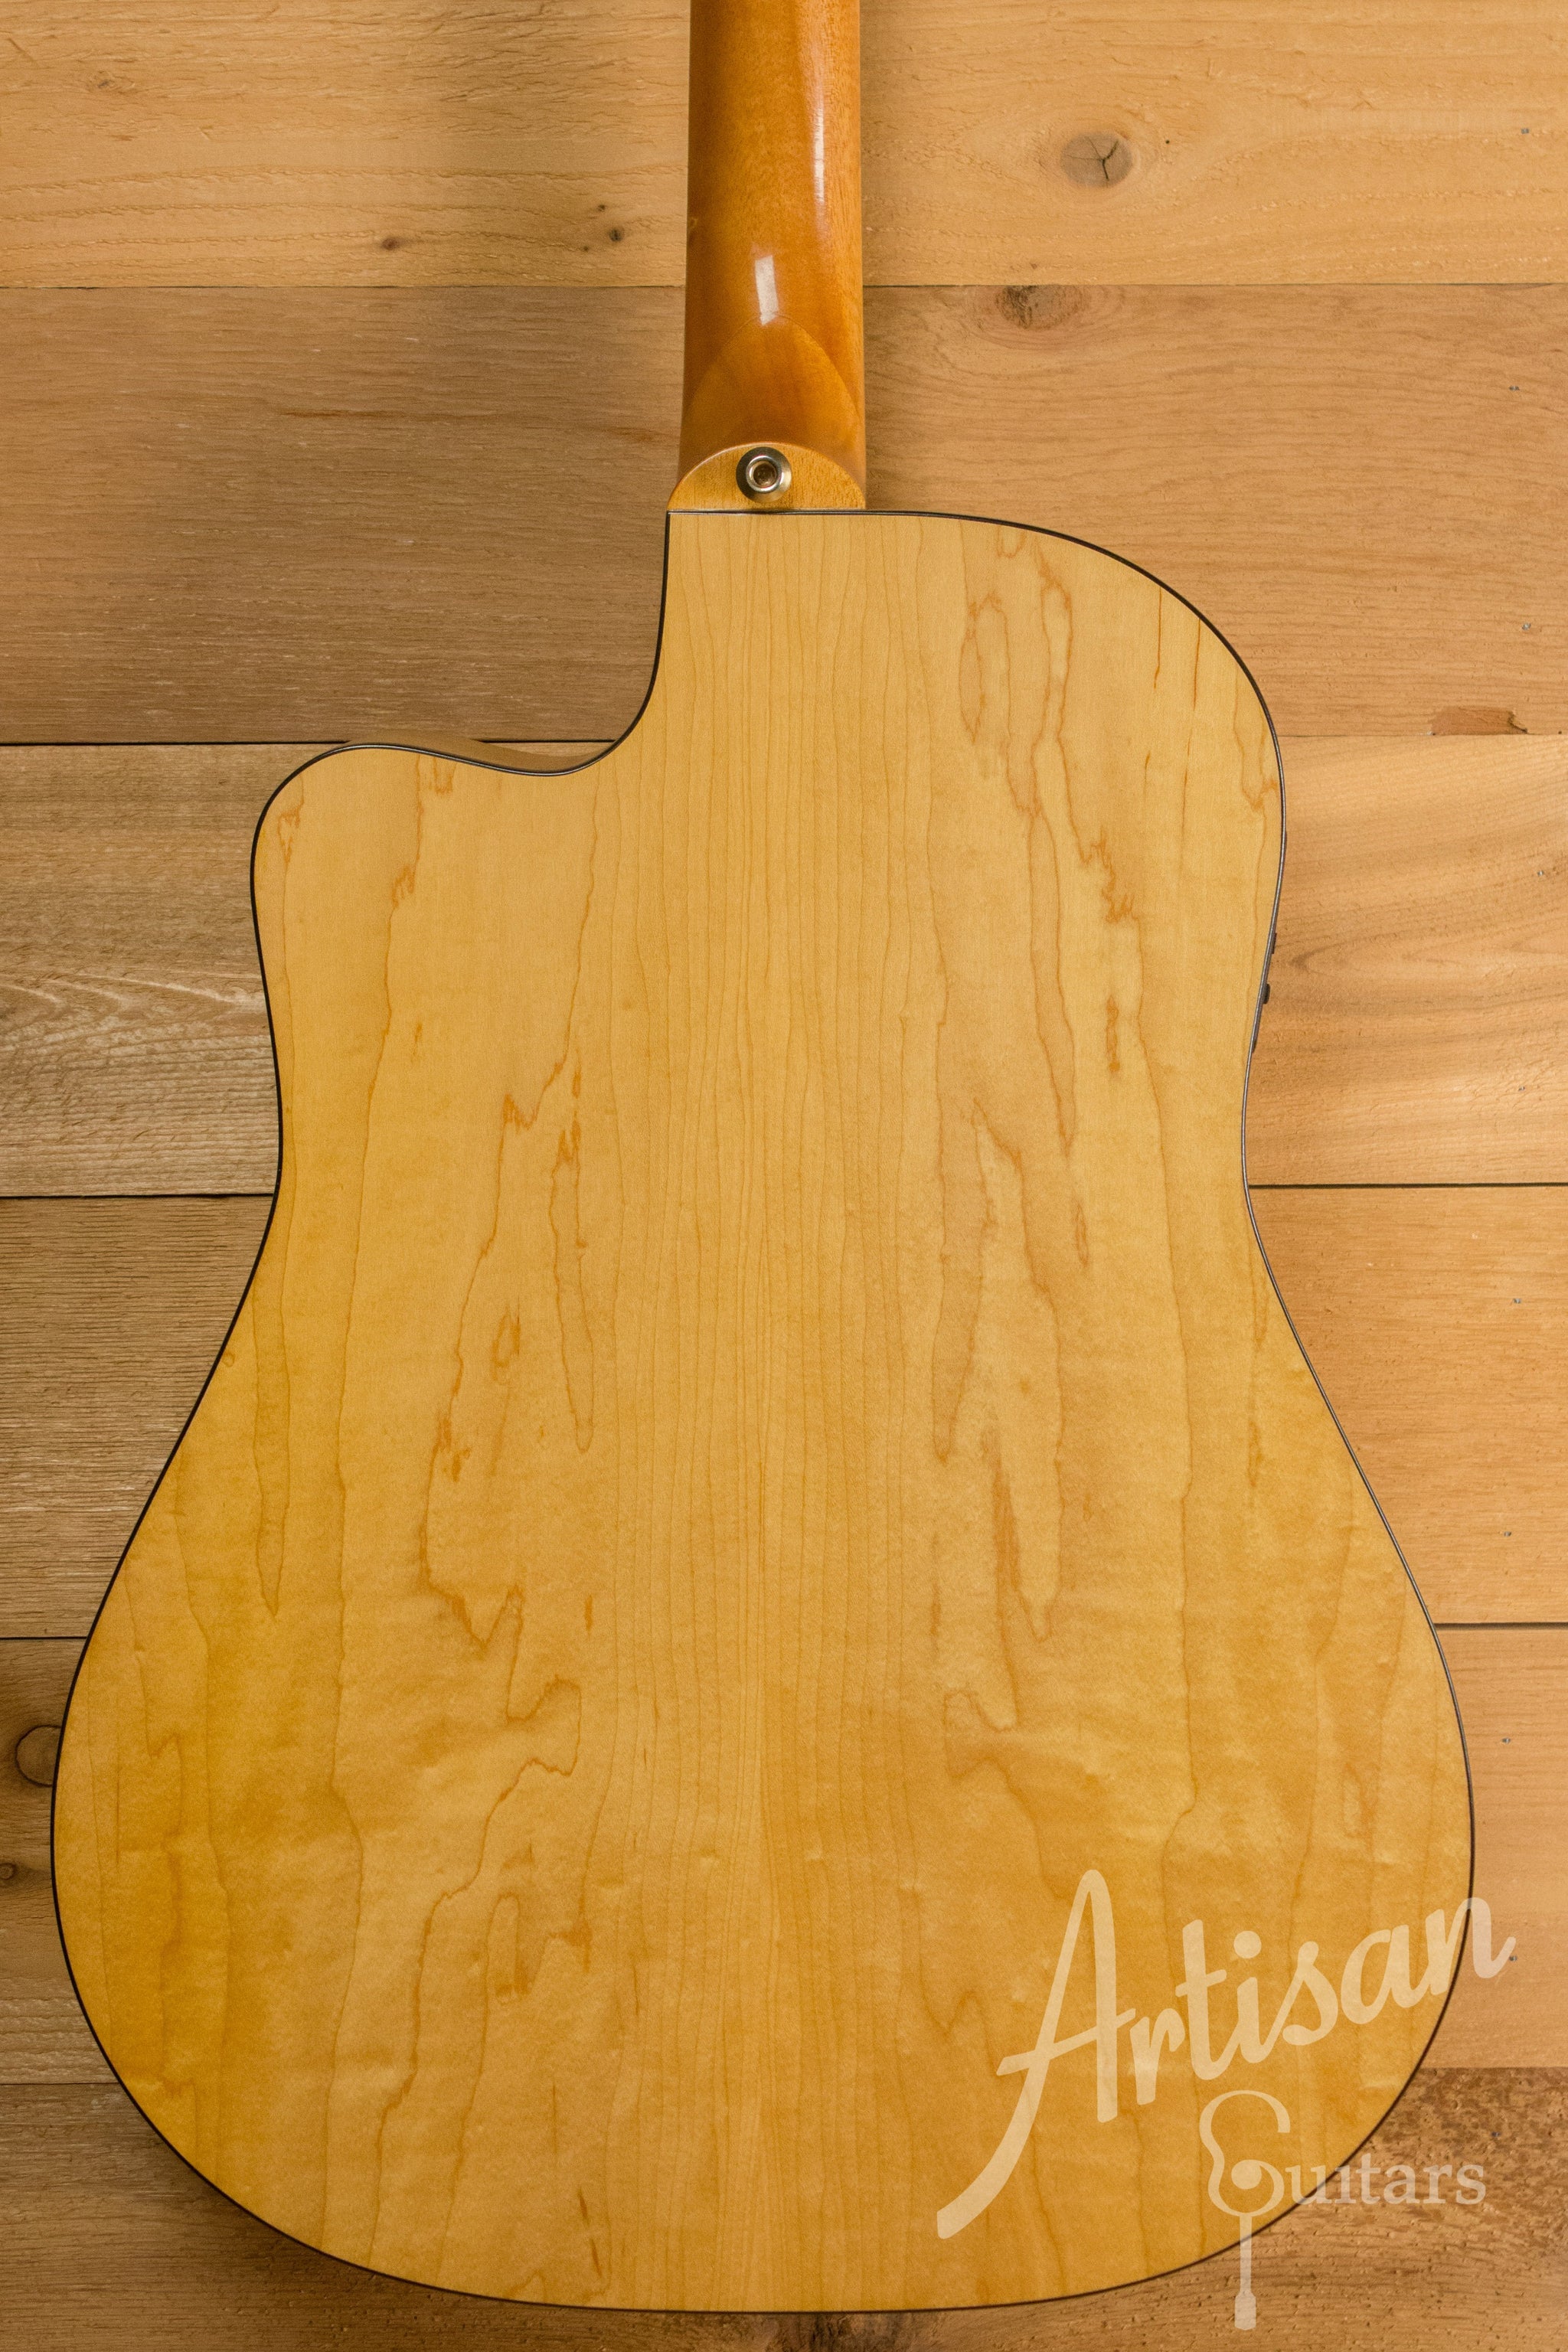 Maton TE2 Guitar Tommy Emmanuel Artist Sitka Spruce and Maple Pre-Owned 2010 ID-11213 - Artisan Guitars